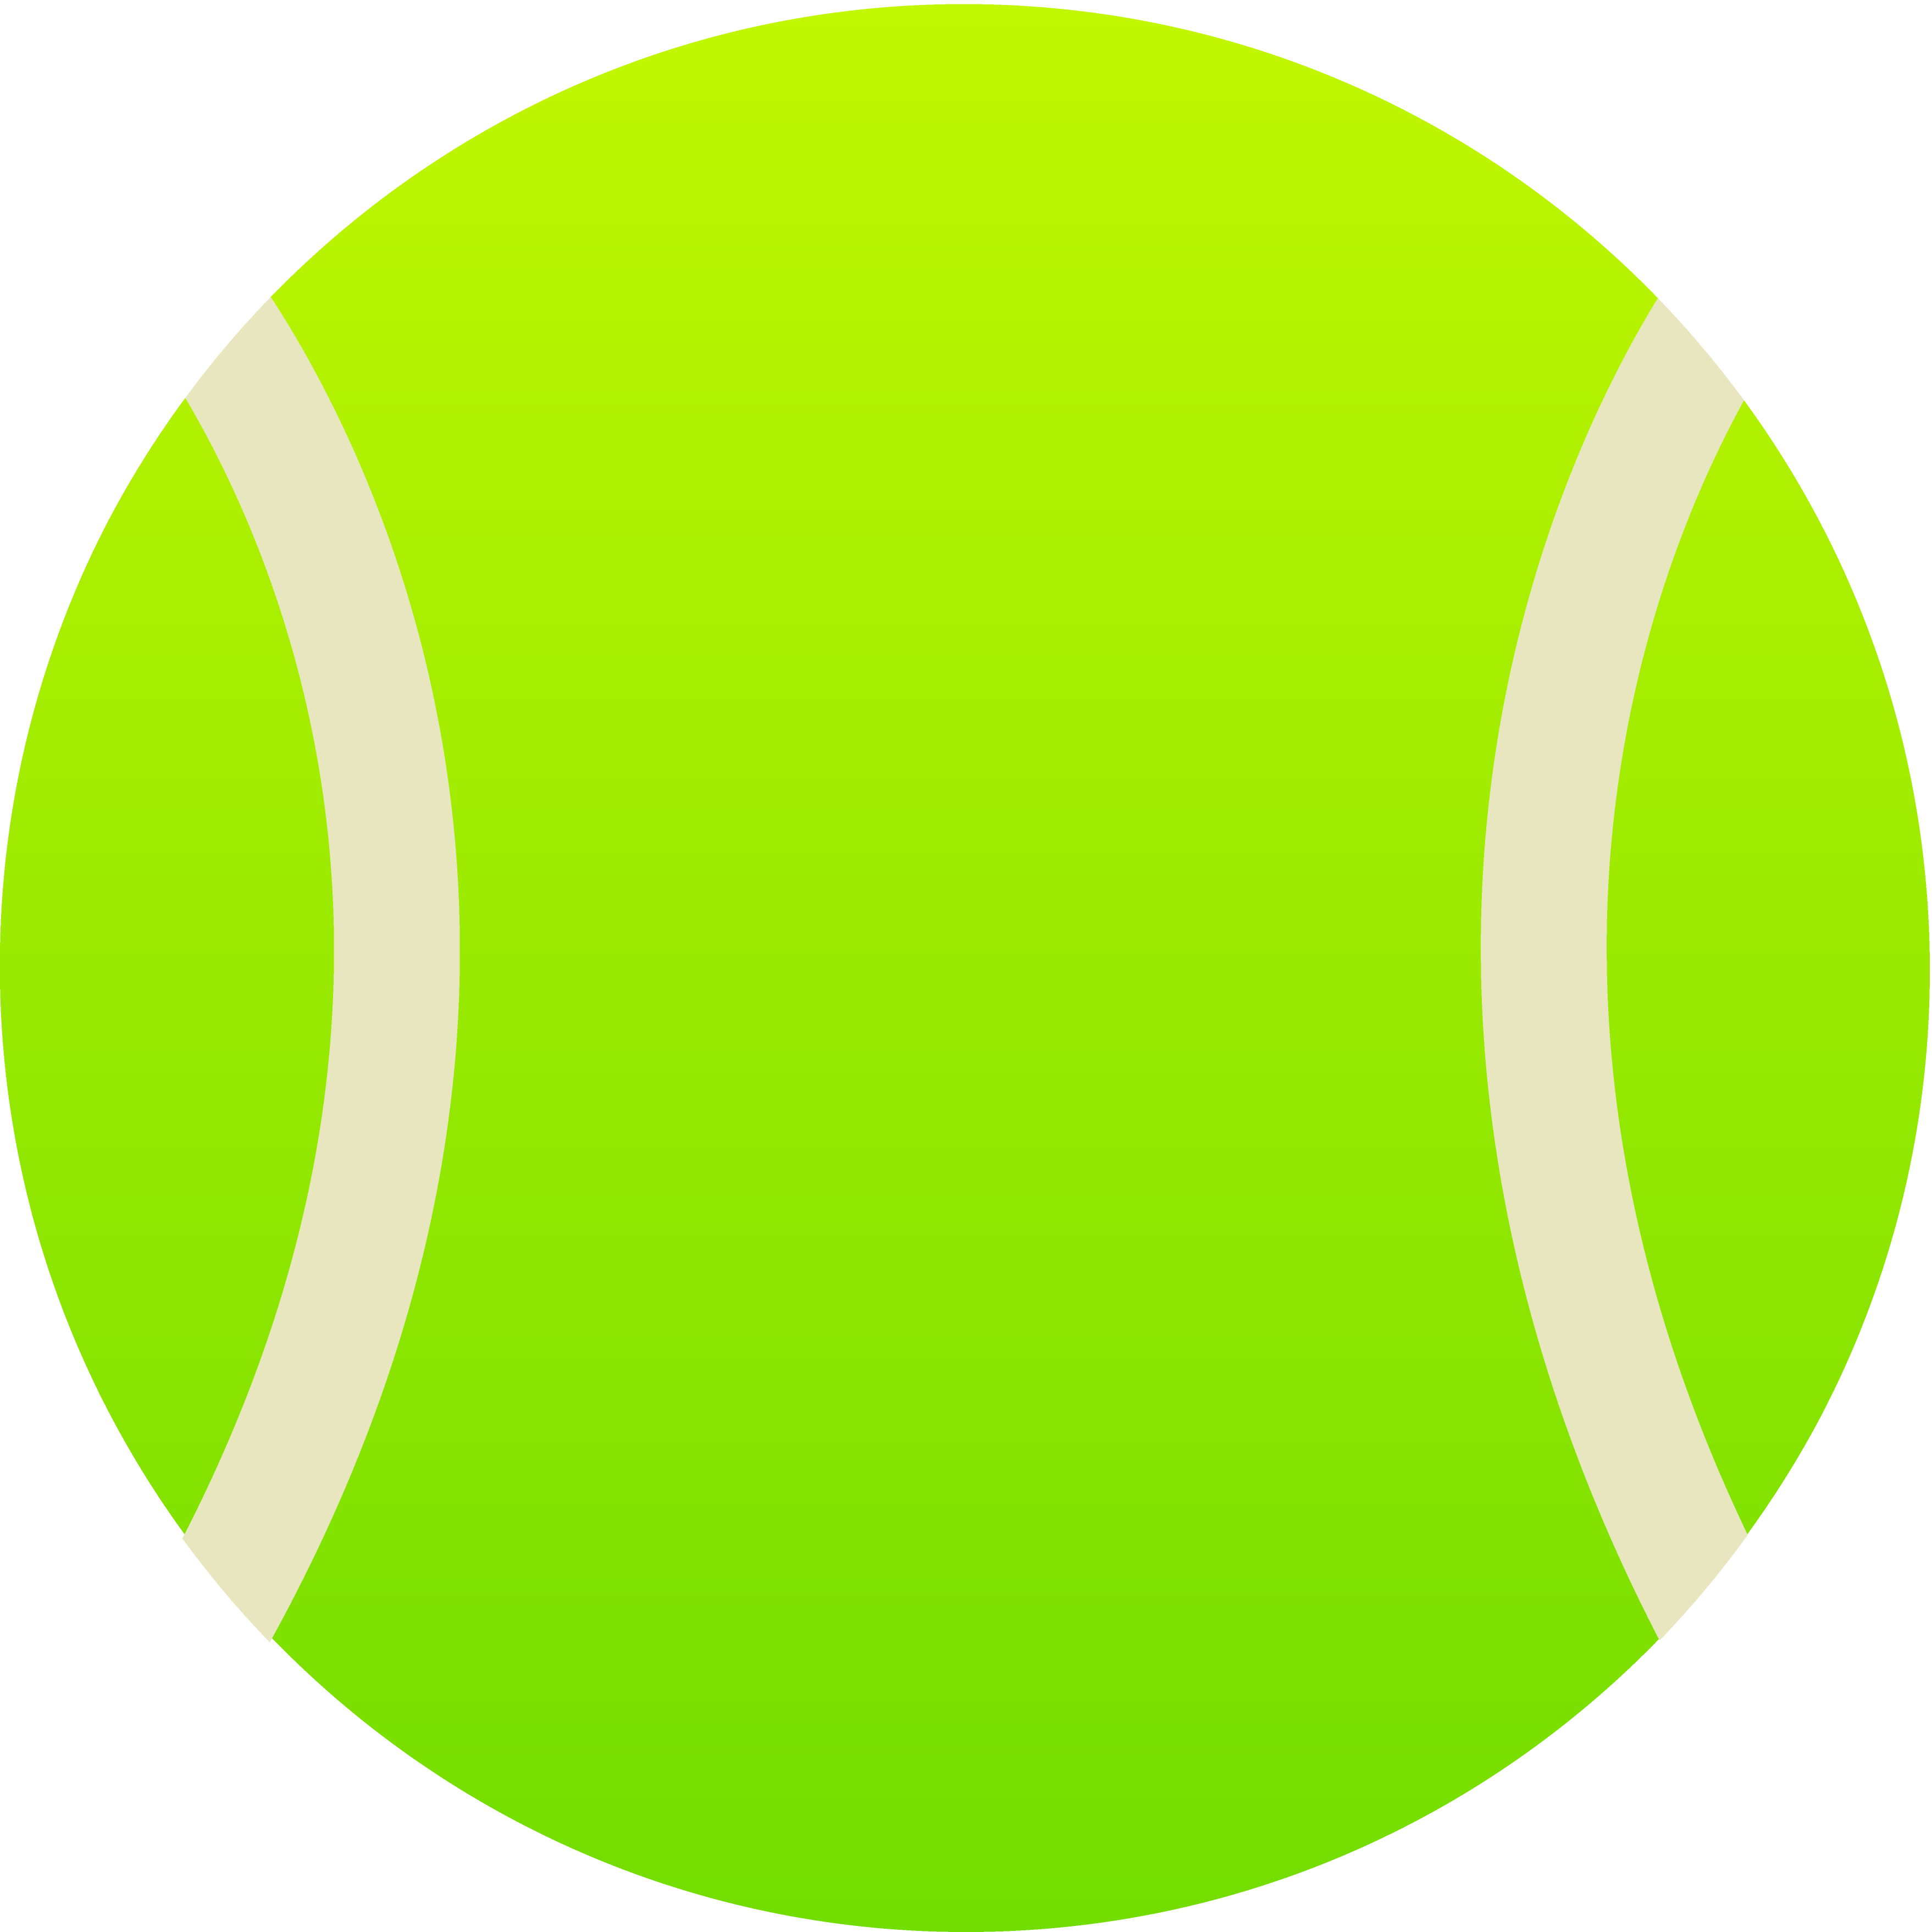 Free Tennis Ball Picture, Download Free Clip Art, Free Clip